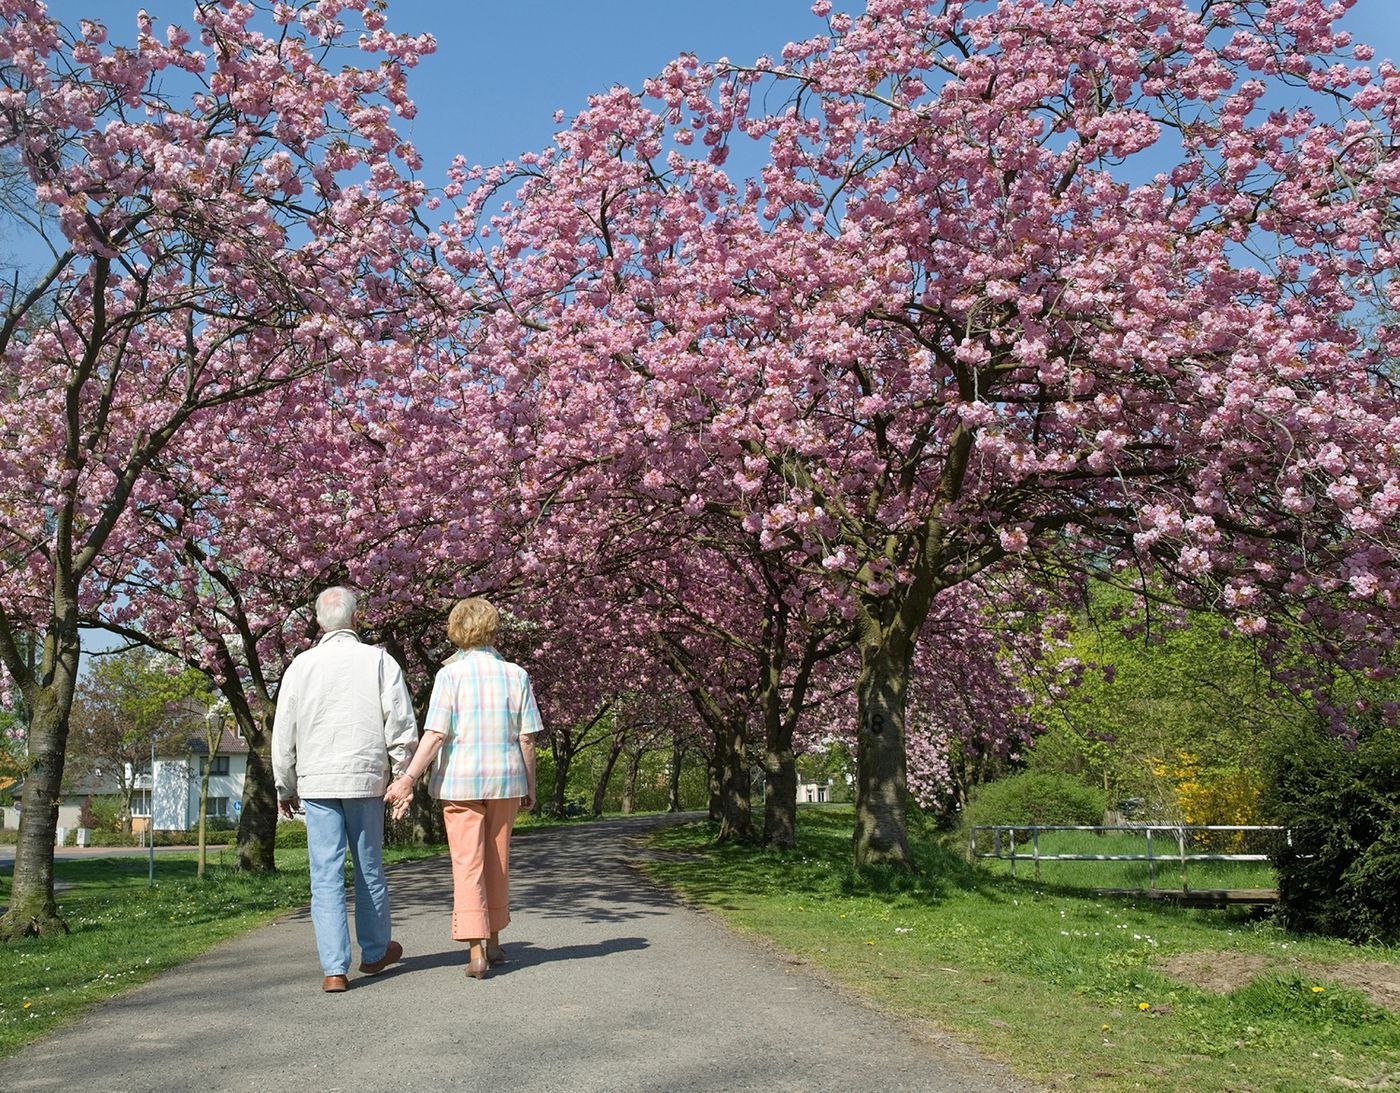 Preparing Your Aging Loved One for Spring